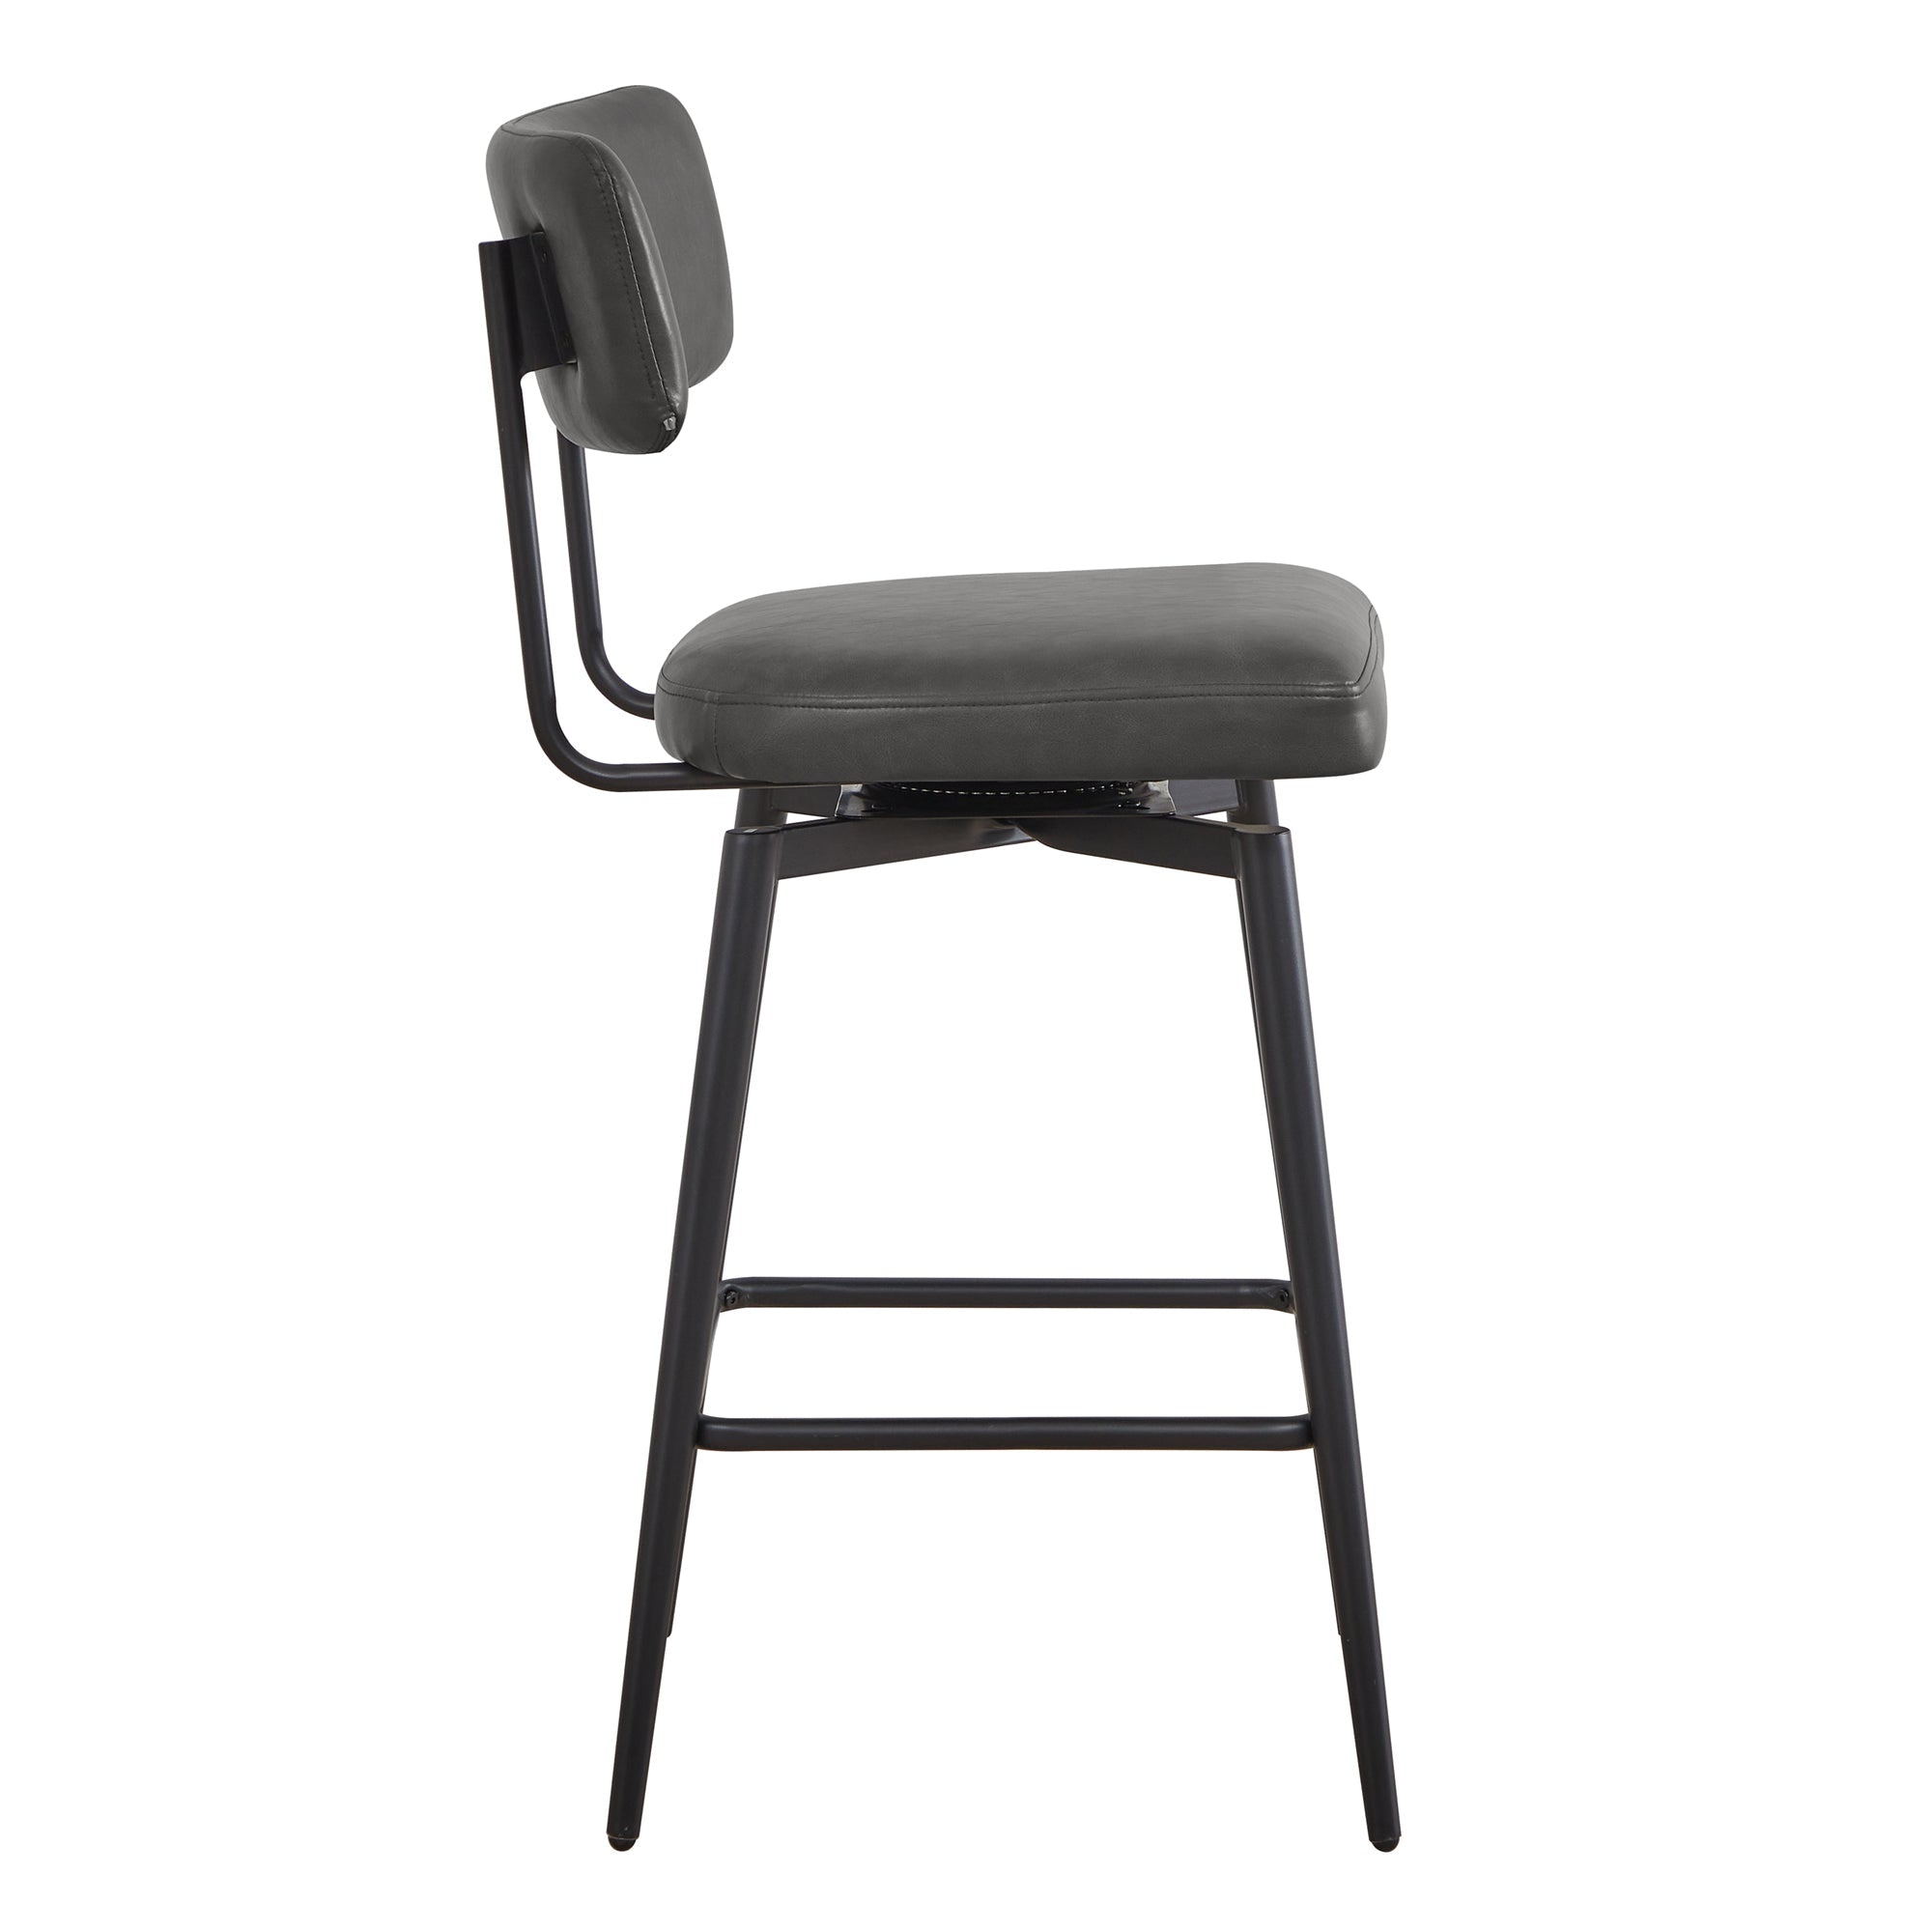 CHITA LIVING-Lovy Swivel Counter Stools (Set of 2）-Counter Stools-Faux Leather-Gray-